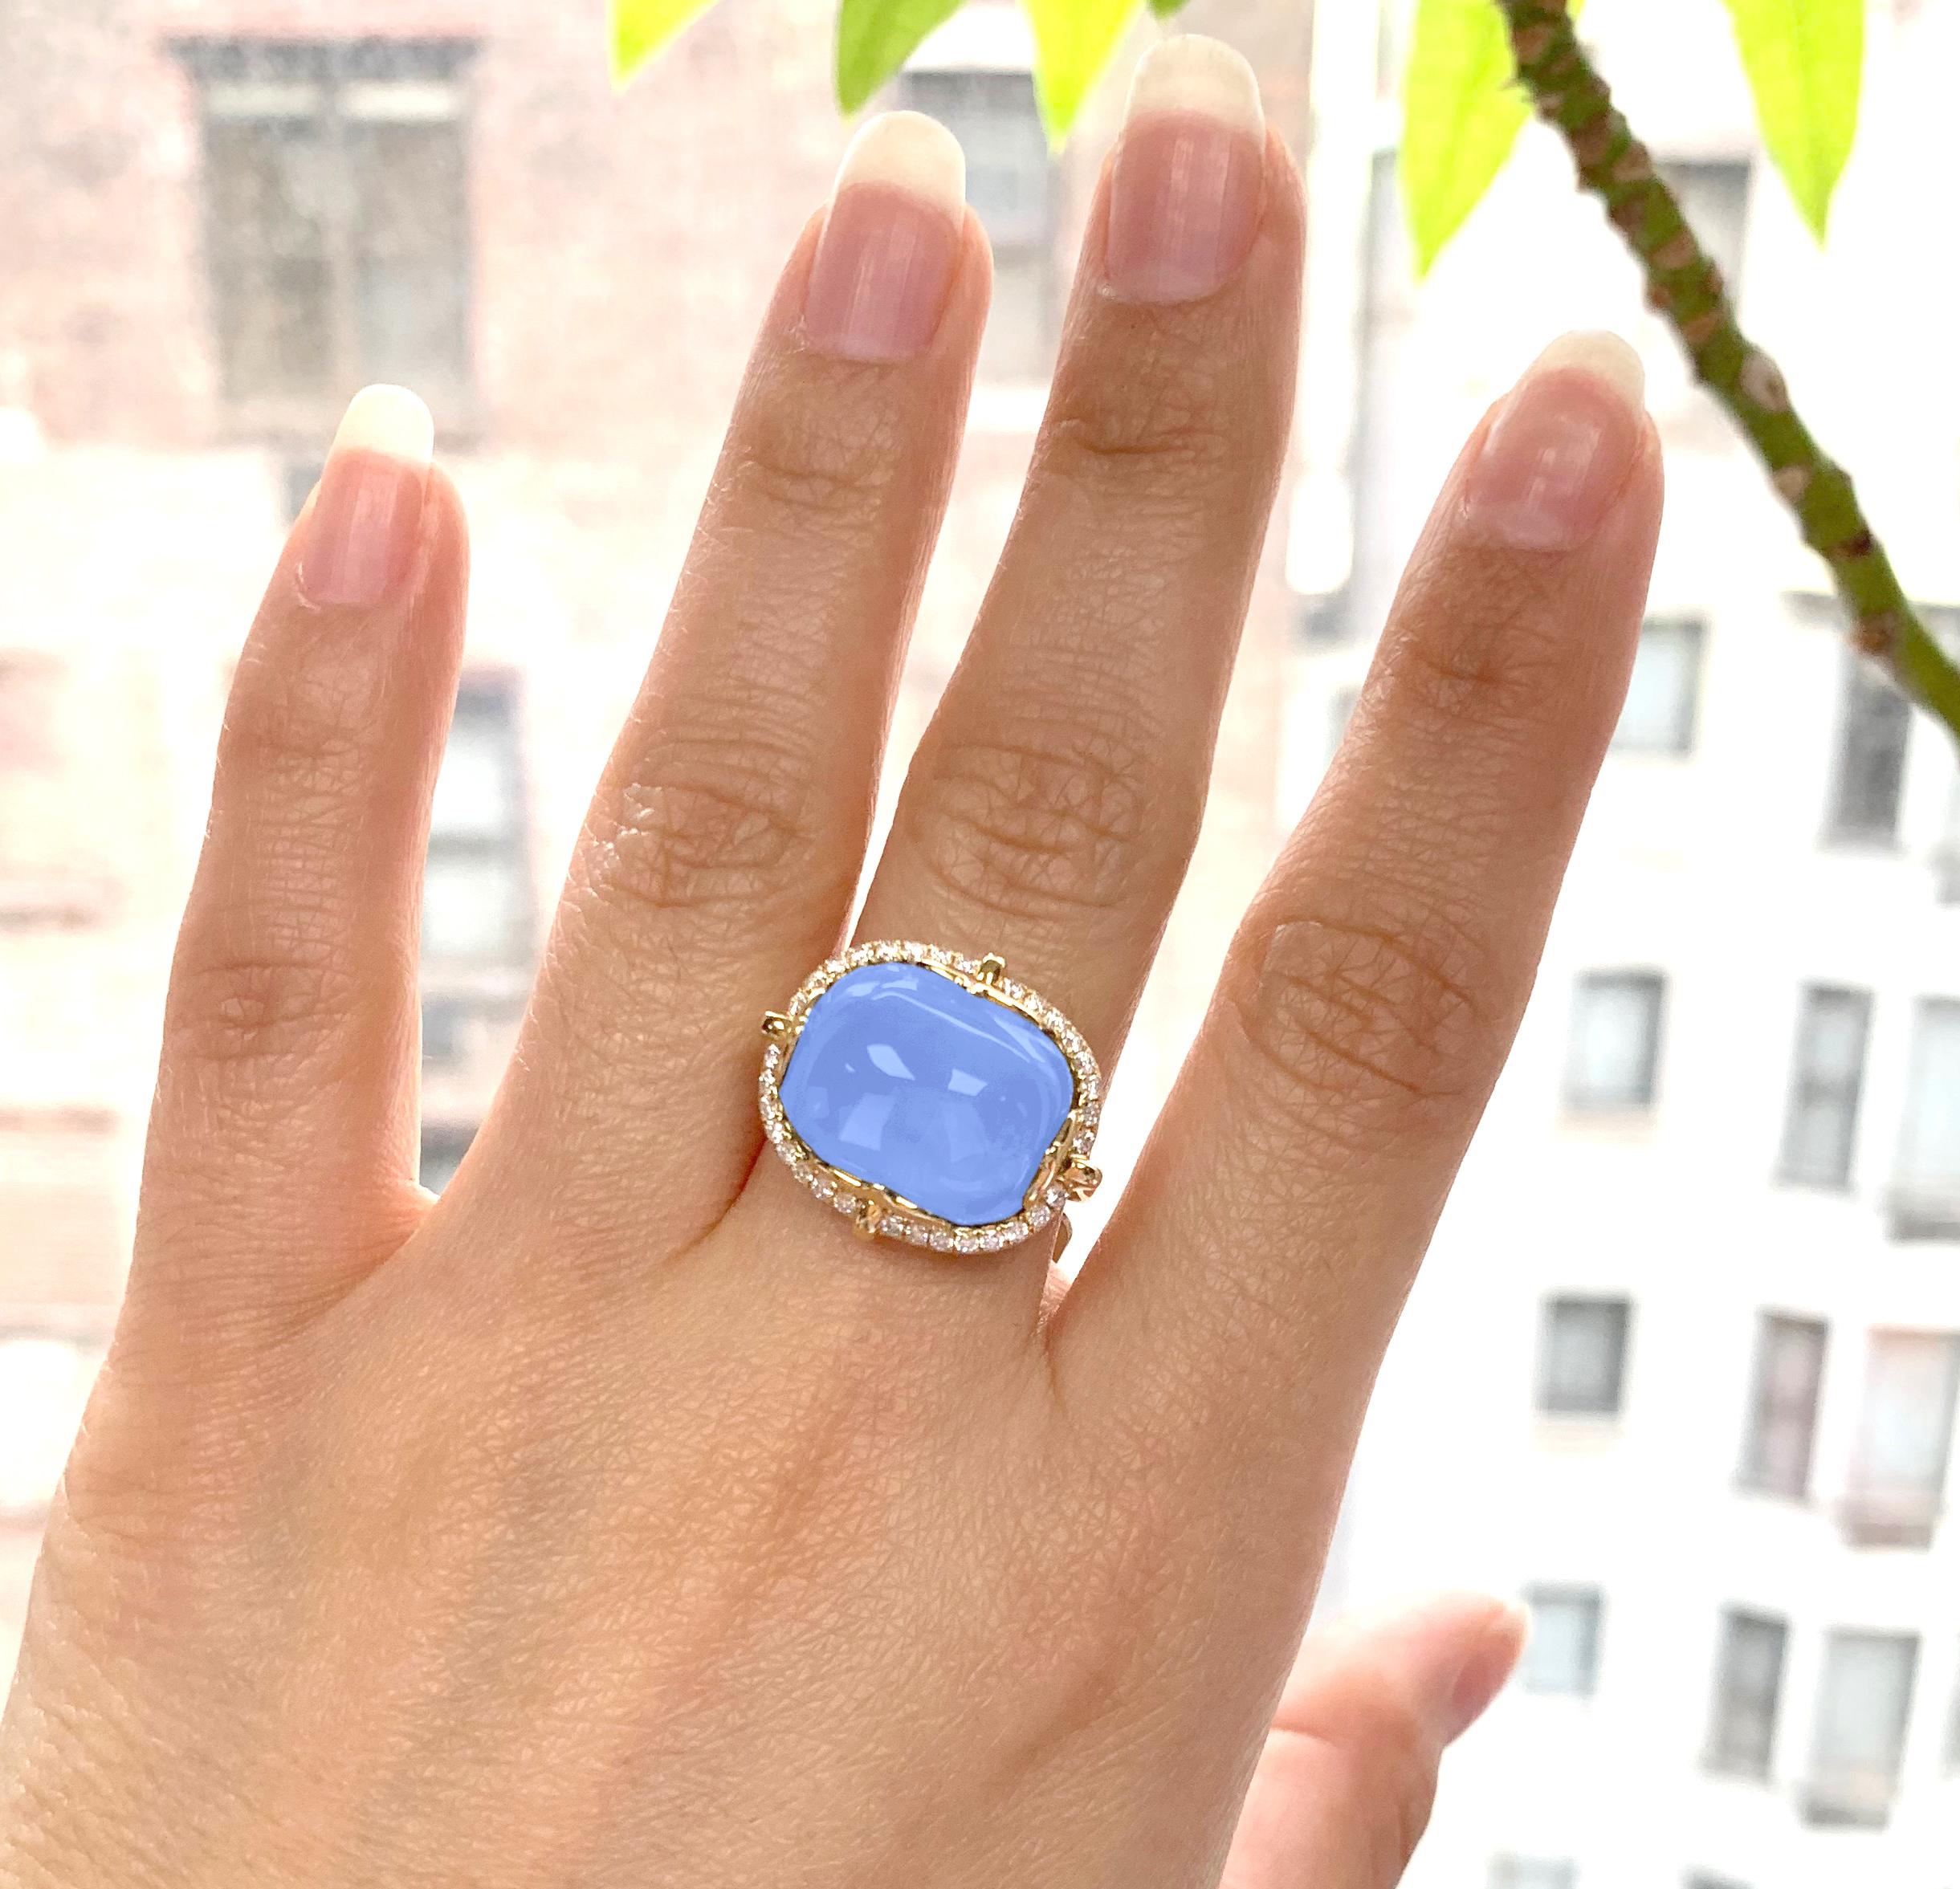 Blue Chalcedony Cushion Cabochon Ring in 18K Yellow Gold, from 'Rock 'N Roll' Collection. Extensive collection of big and bold pieces. Like the music, this Rock ‘n Roll collection is electric in color and very stimulating to the eye. These exciting